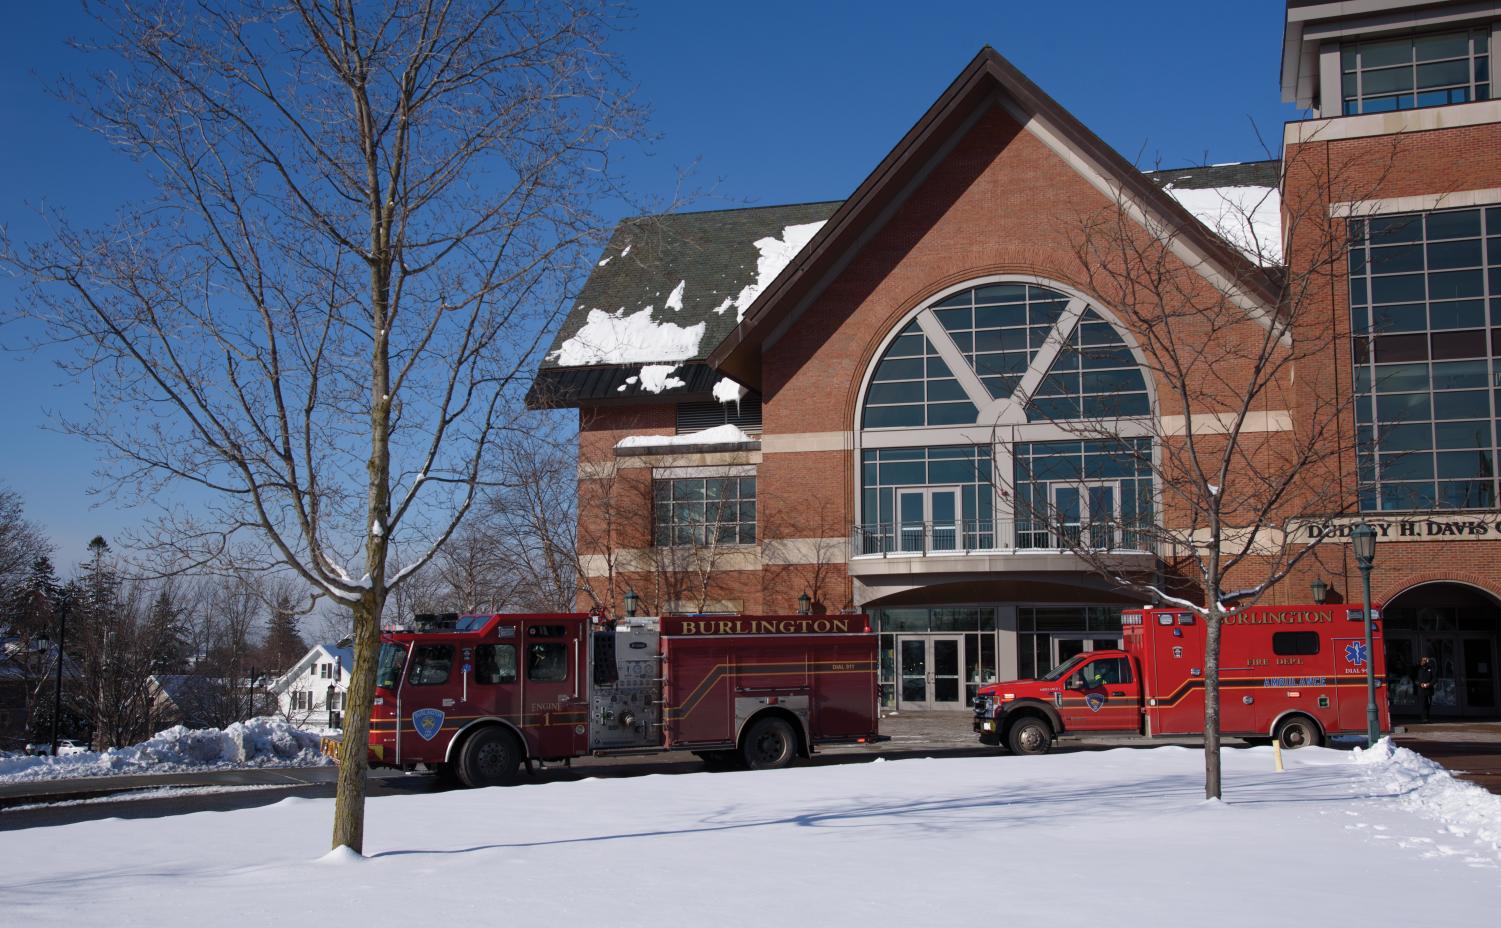 More fire trucks on campus in 2022 indicates return to pre-COVID numbers, chief says image